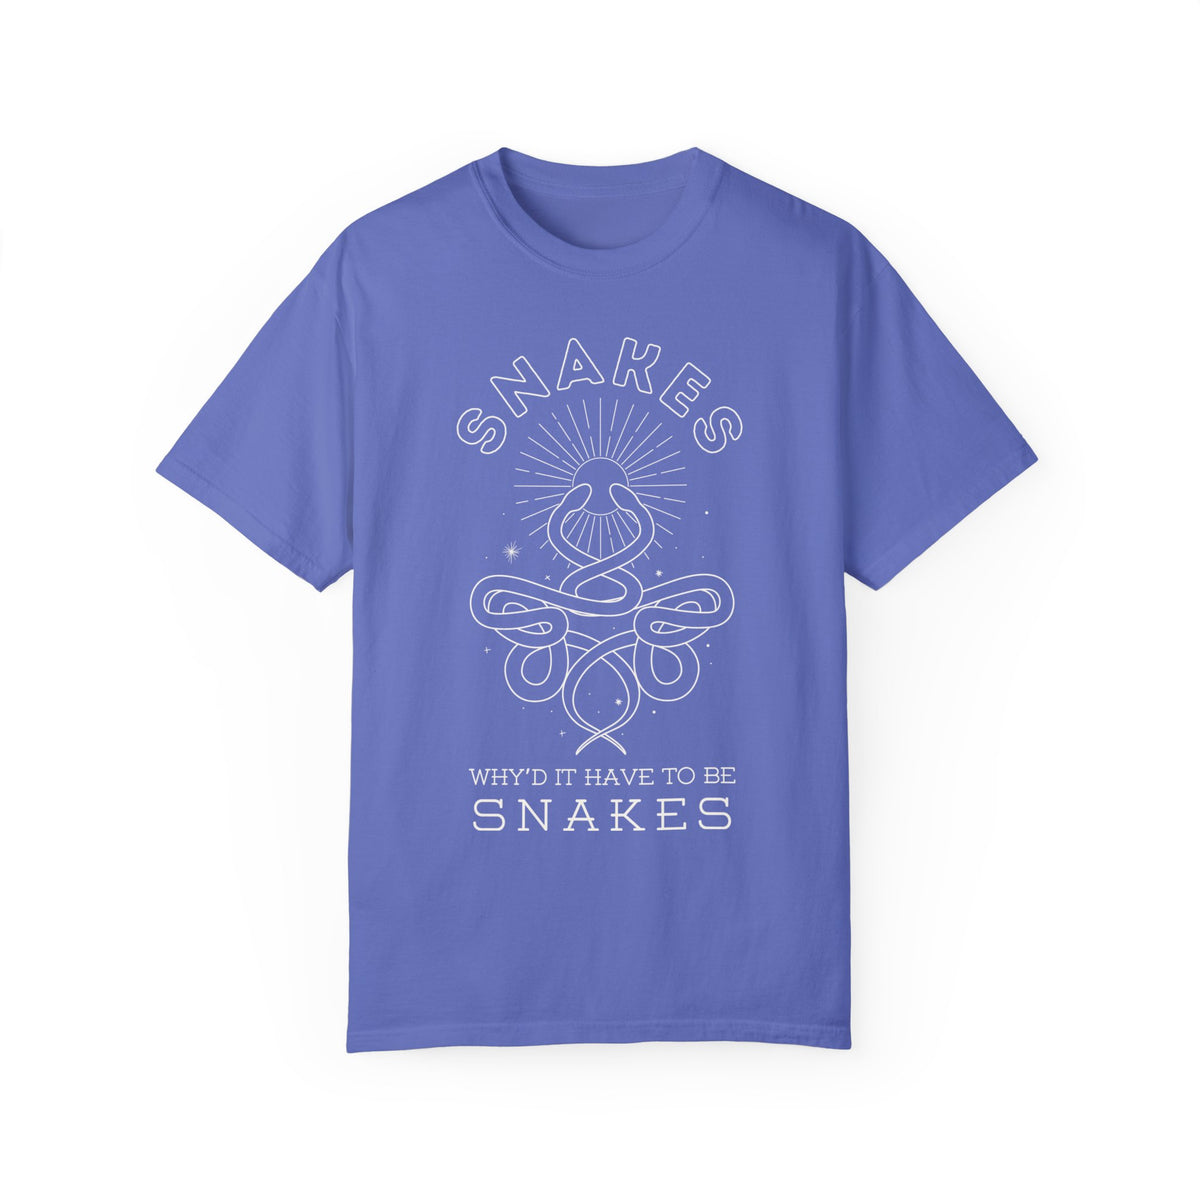 Why'd It Have To Be Snakes Comfort Colors Unisex Garment-Dyed T-shirt